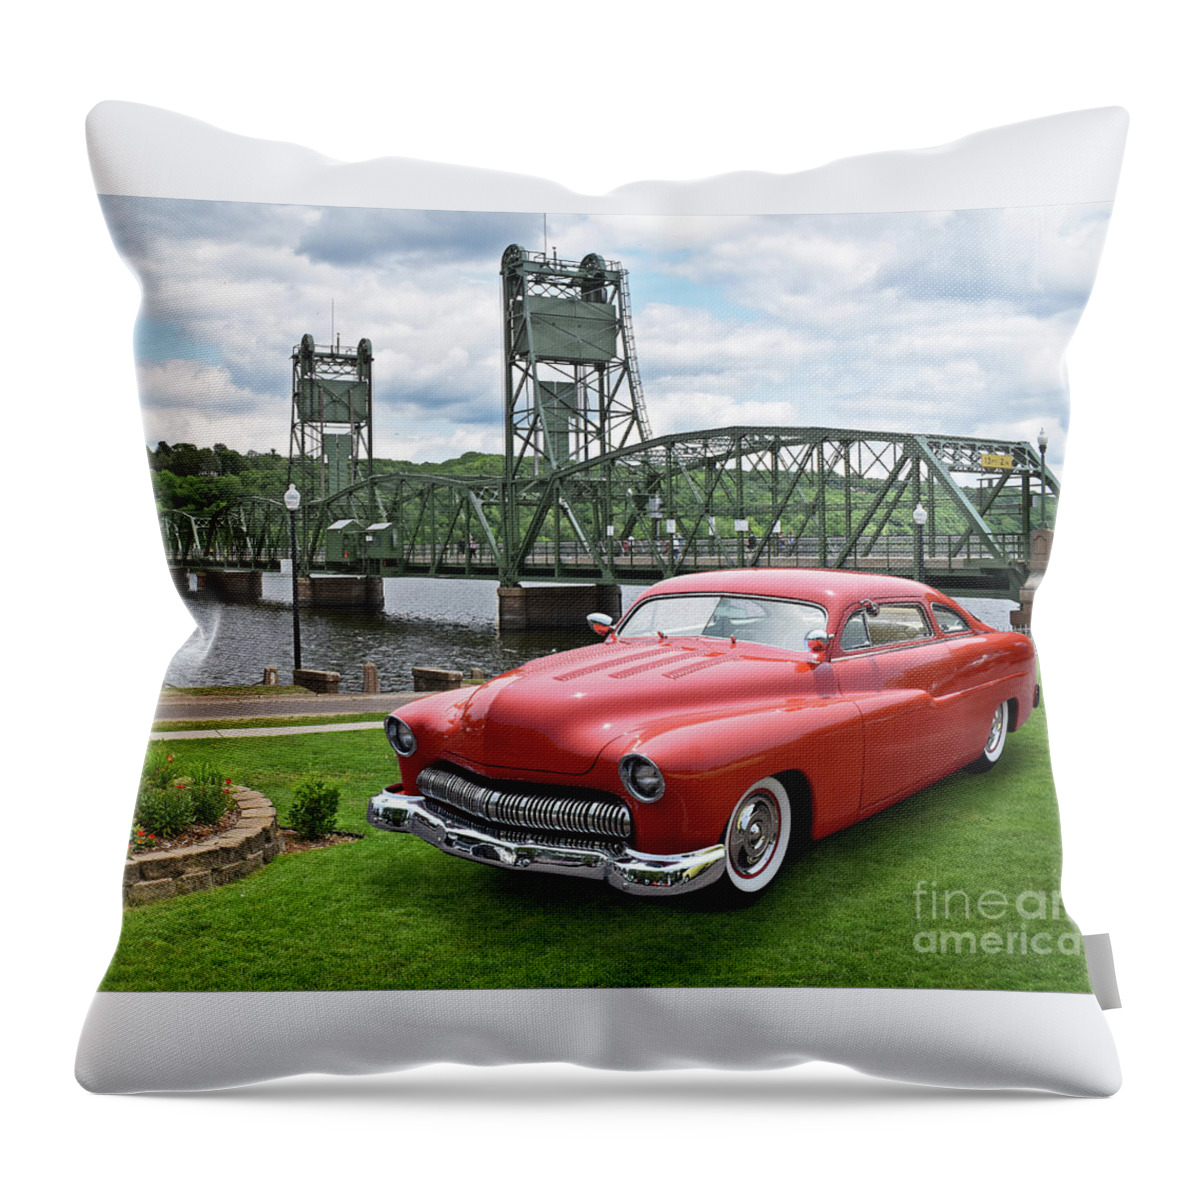 Stillwater Throw Pillow featuring the photograph Stillwater Lead Sled by Ron Long